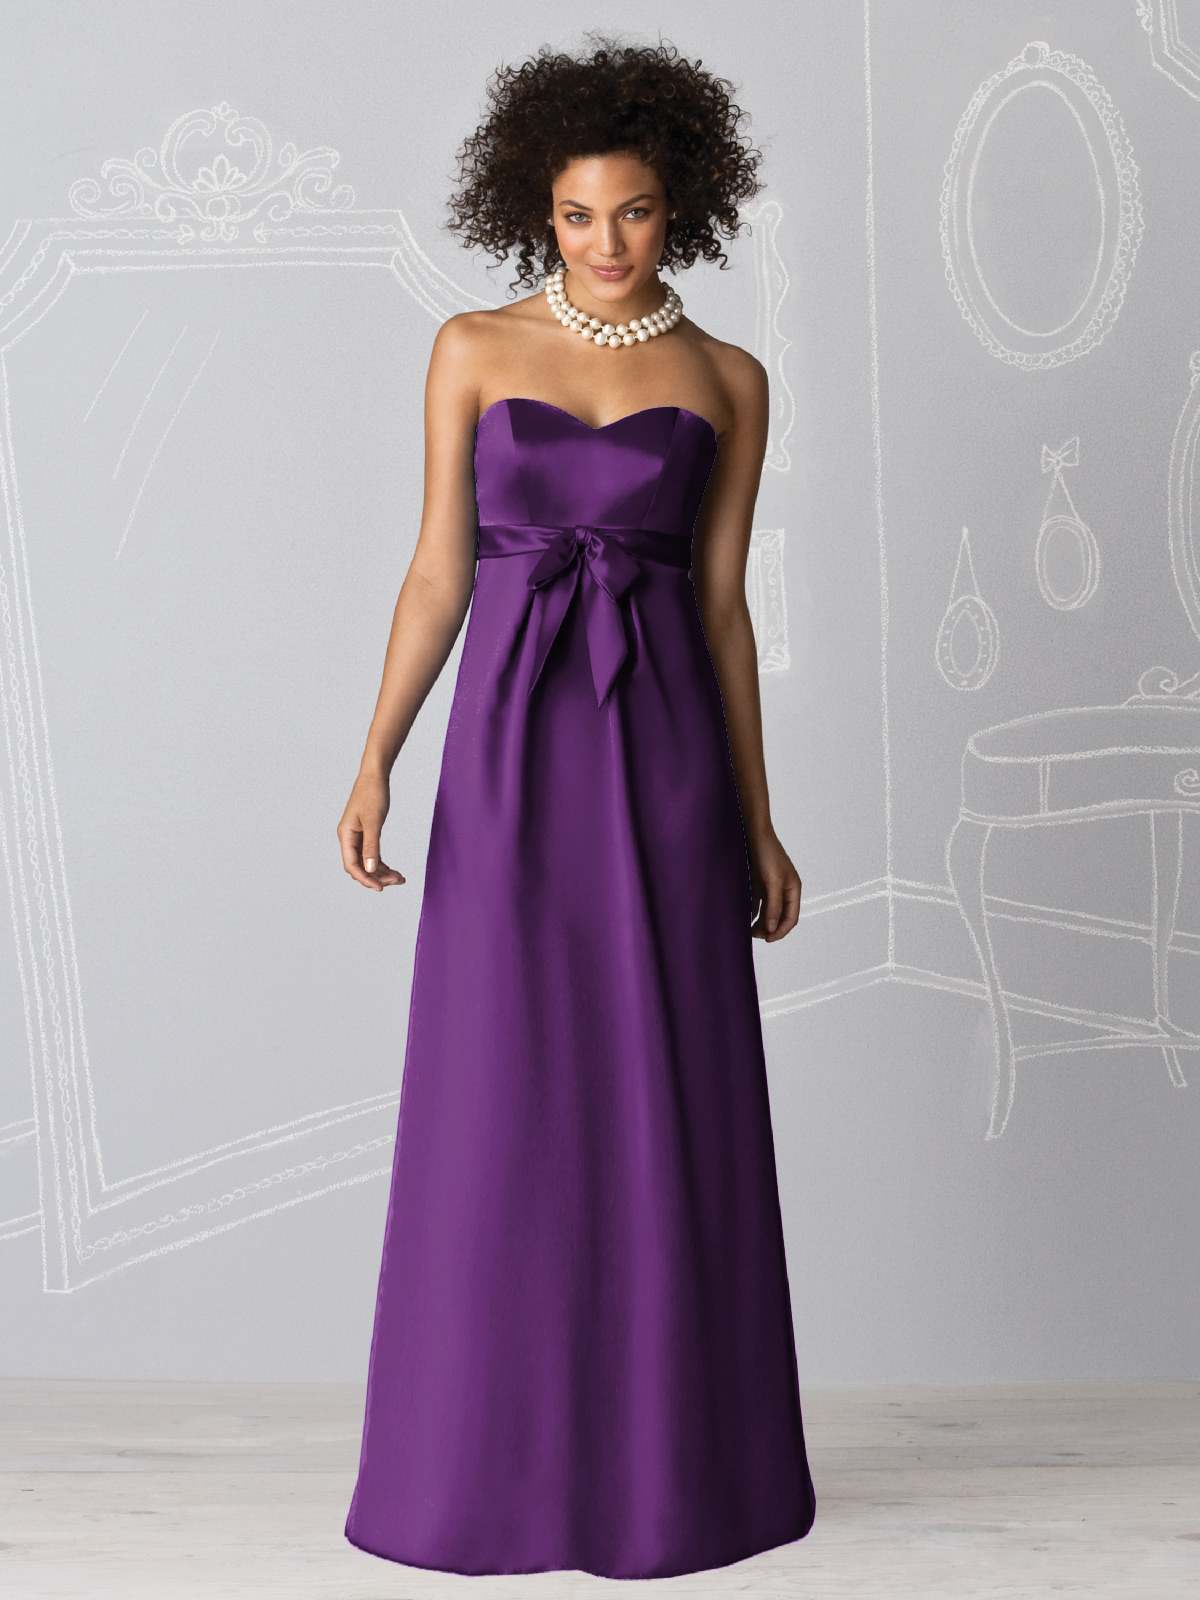 Purple Empire Sweetheart And Strapless Zipper Floor Length Satin Prom Dresses With Sash 